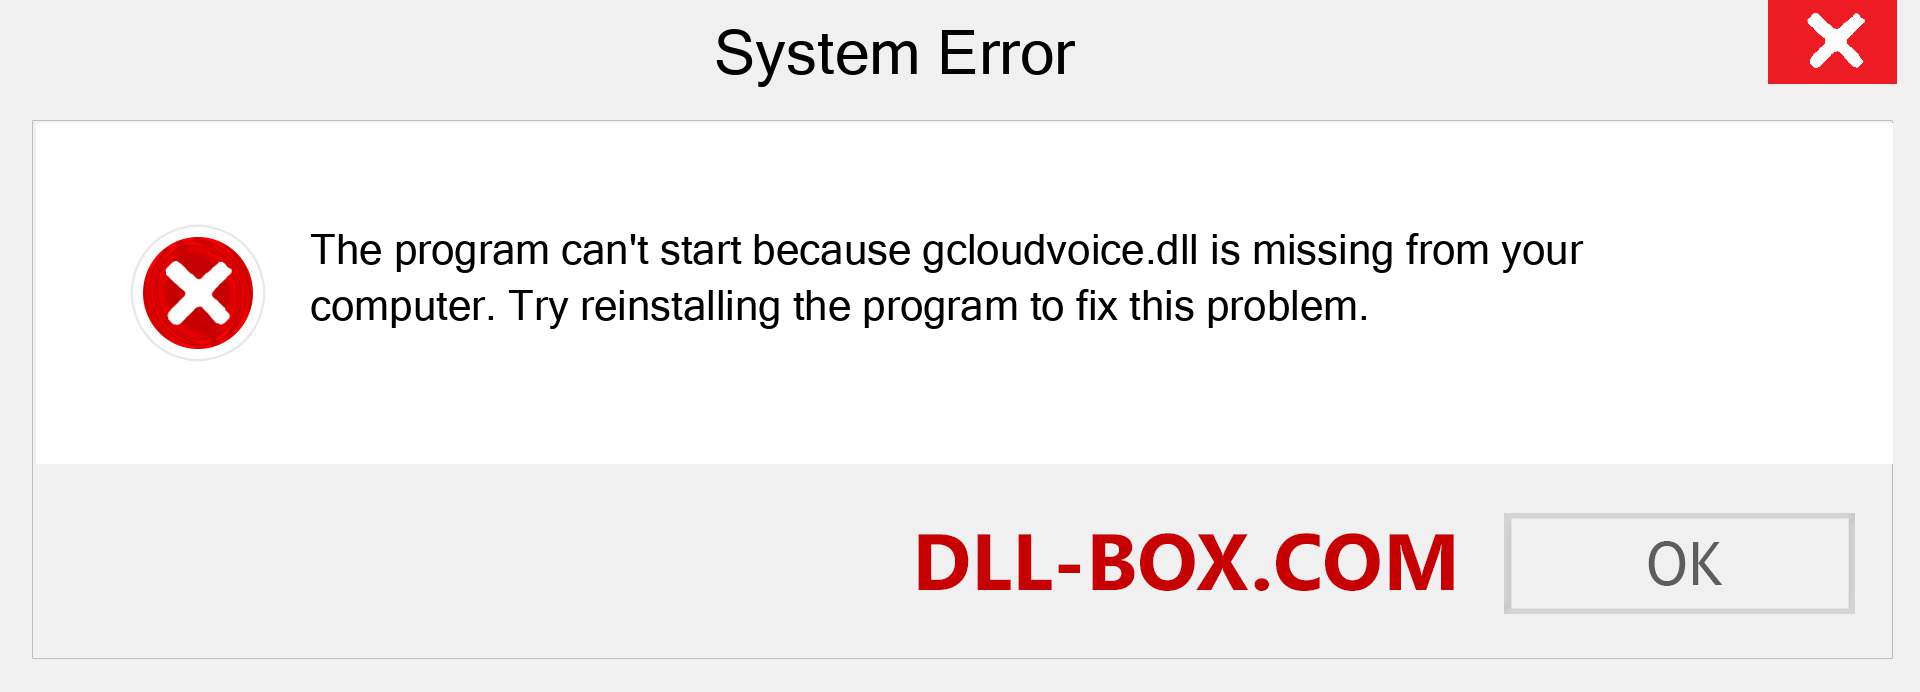  gcloudvoice.dll file is missing?. Download for Windows 7, 8, 10 - Fix  gcloudvoice dll Missing Error on Windows, photos, images